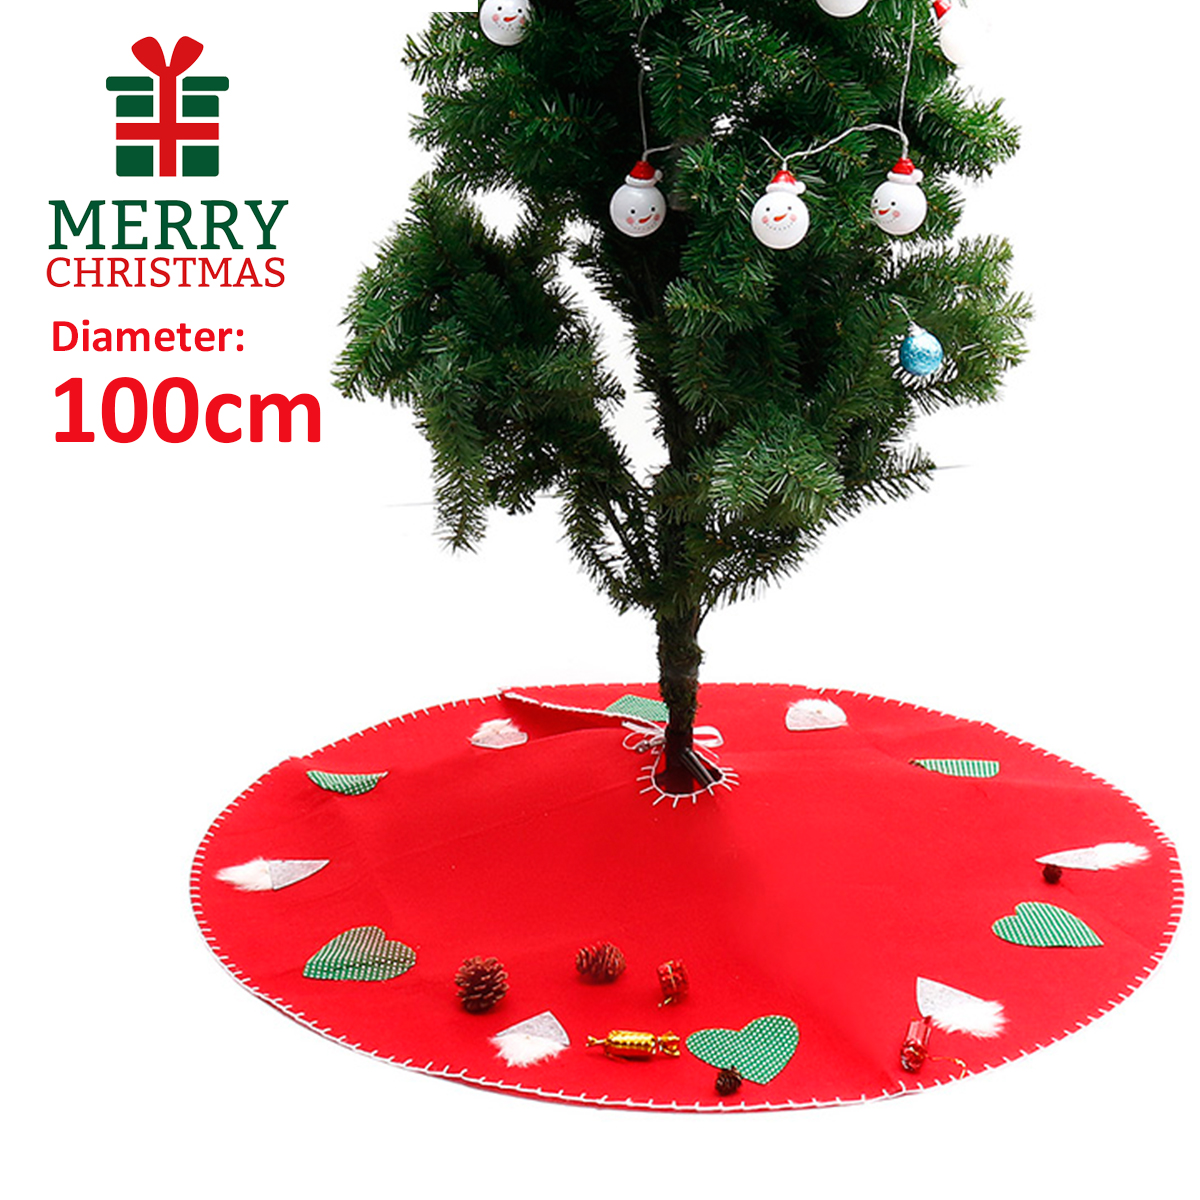 100cm-Red-Christmas-Tree-Skirt-Carpet-Party-Gift-Decor-Pad-Ornaments-Round-Mat-1376090-1